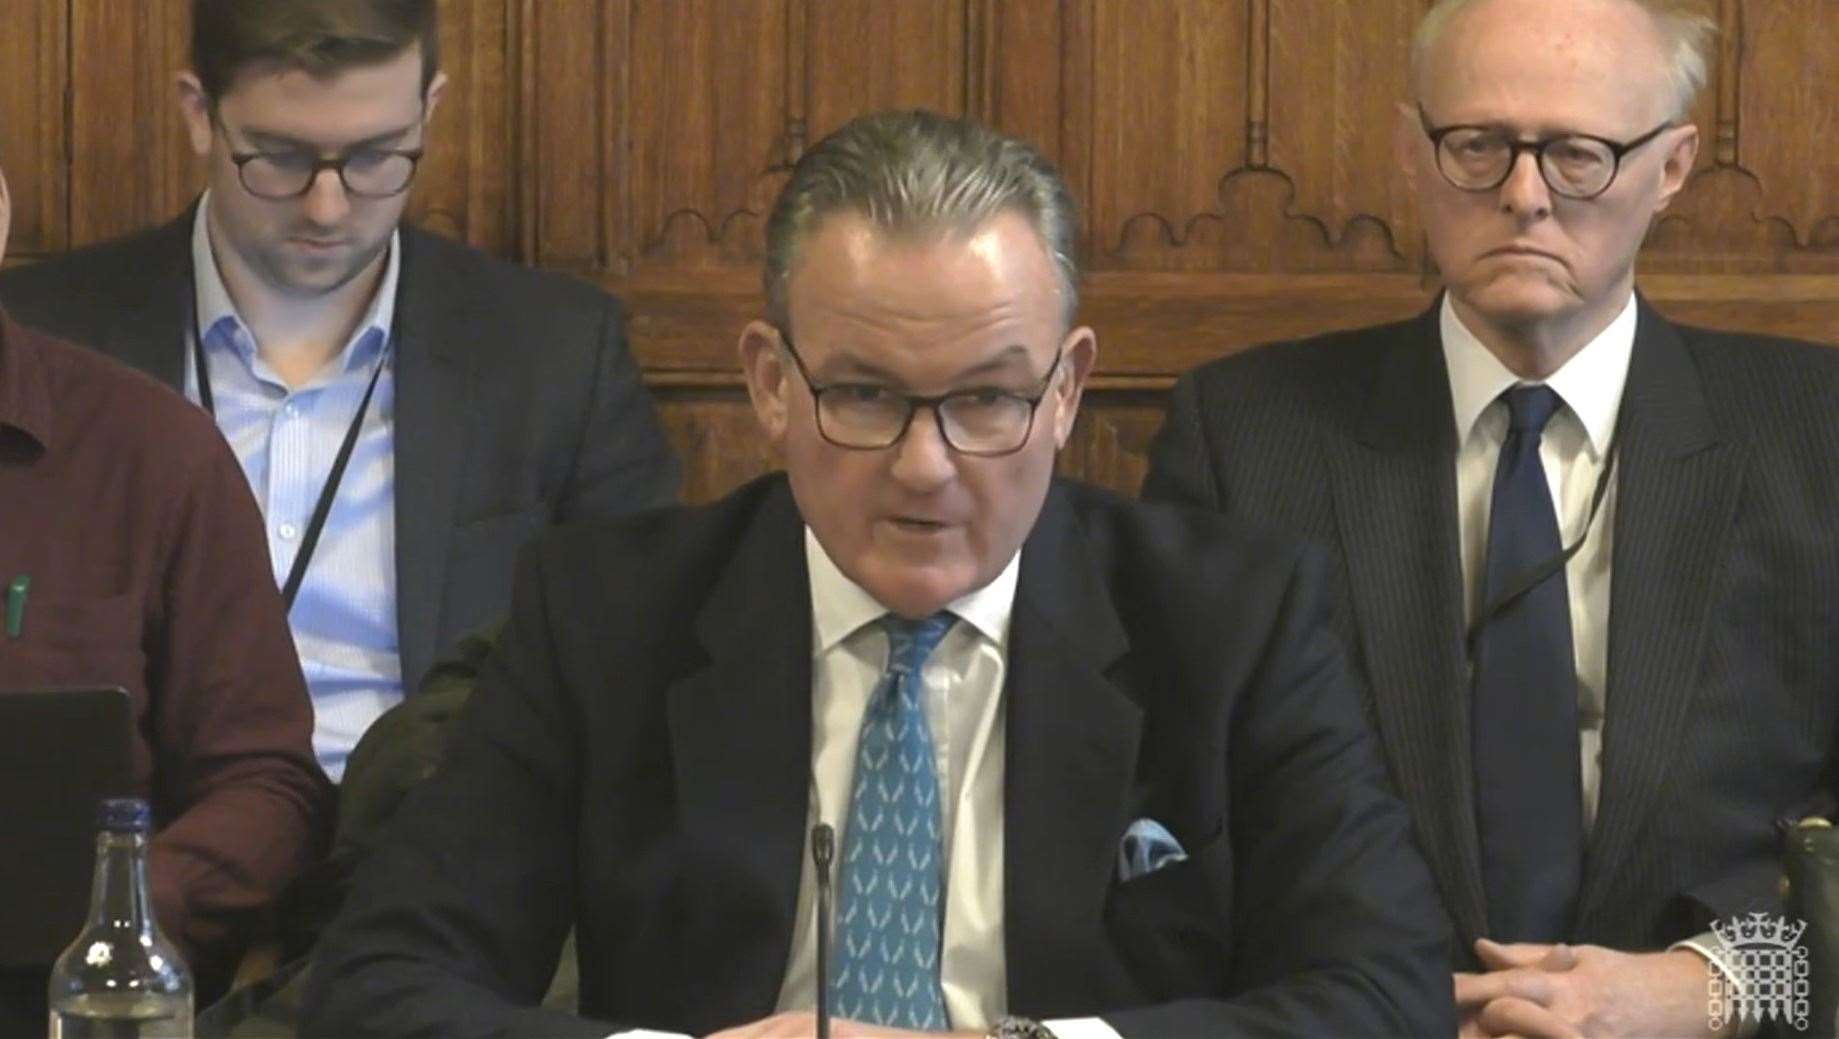 David Neal, former independent chief inspector of borders and immigration giving evidence to the Home Office Select Committee (House of Commons/UK Parliament/PA)